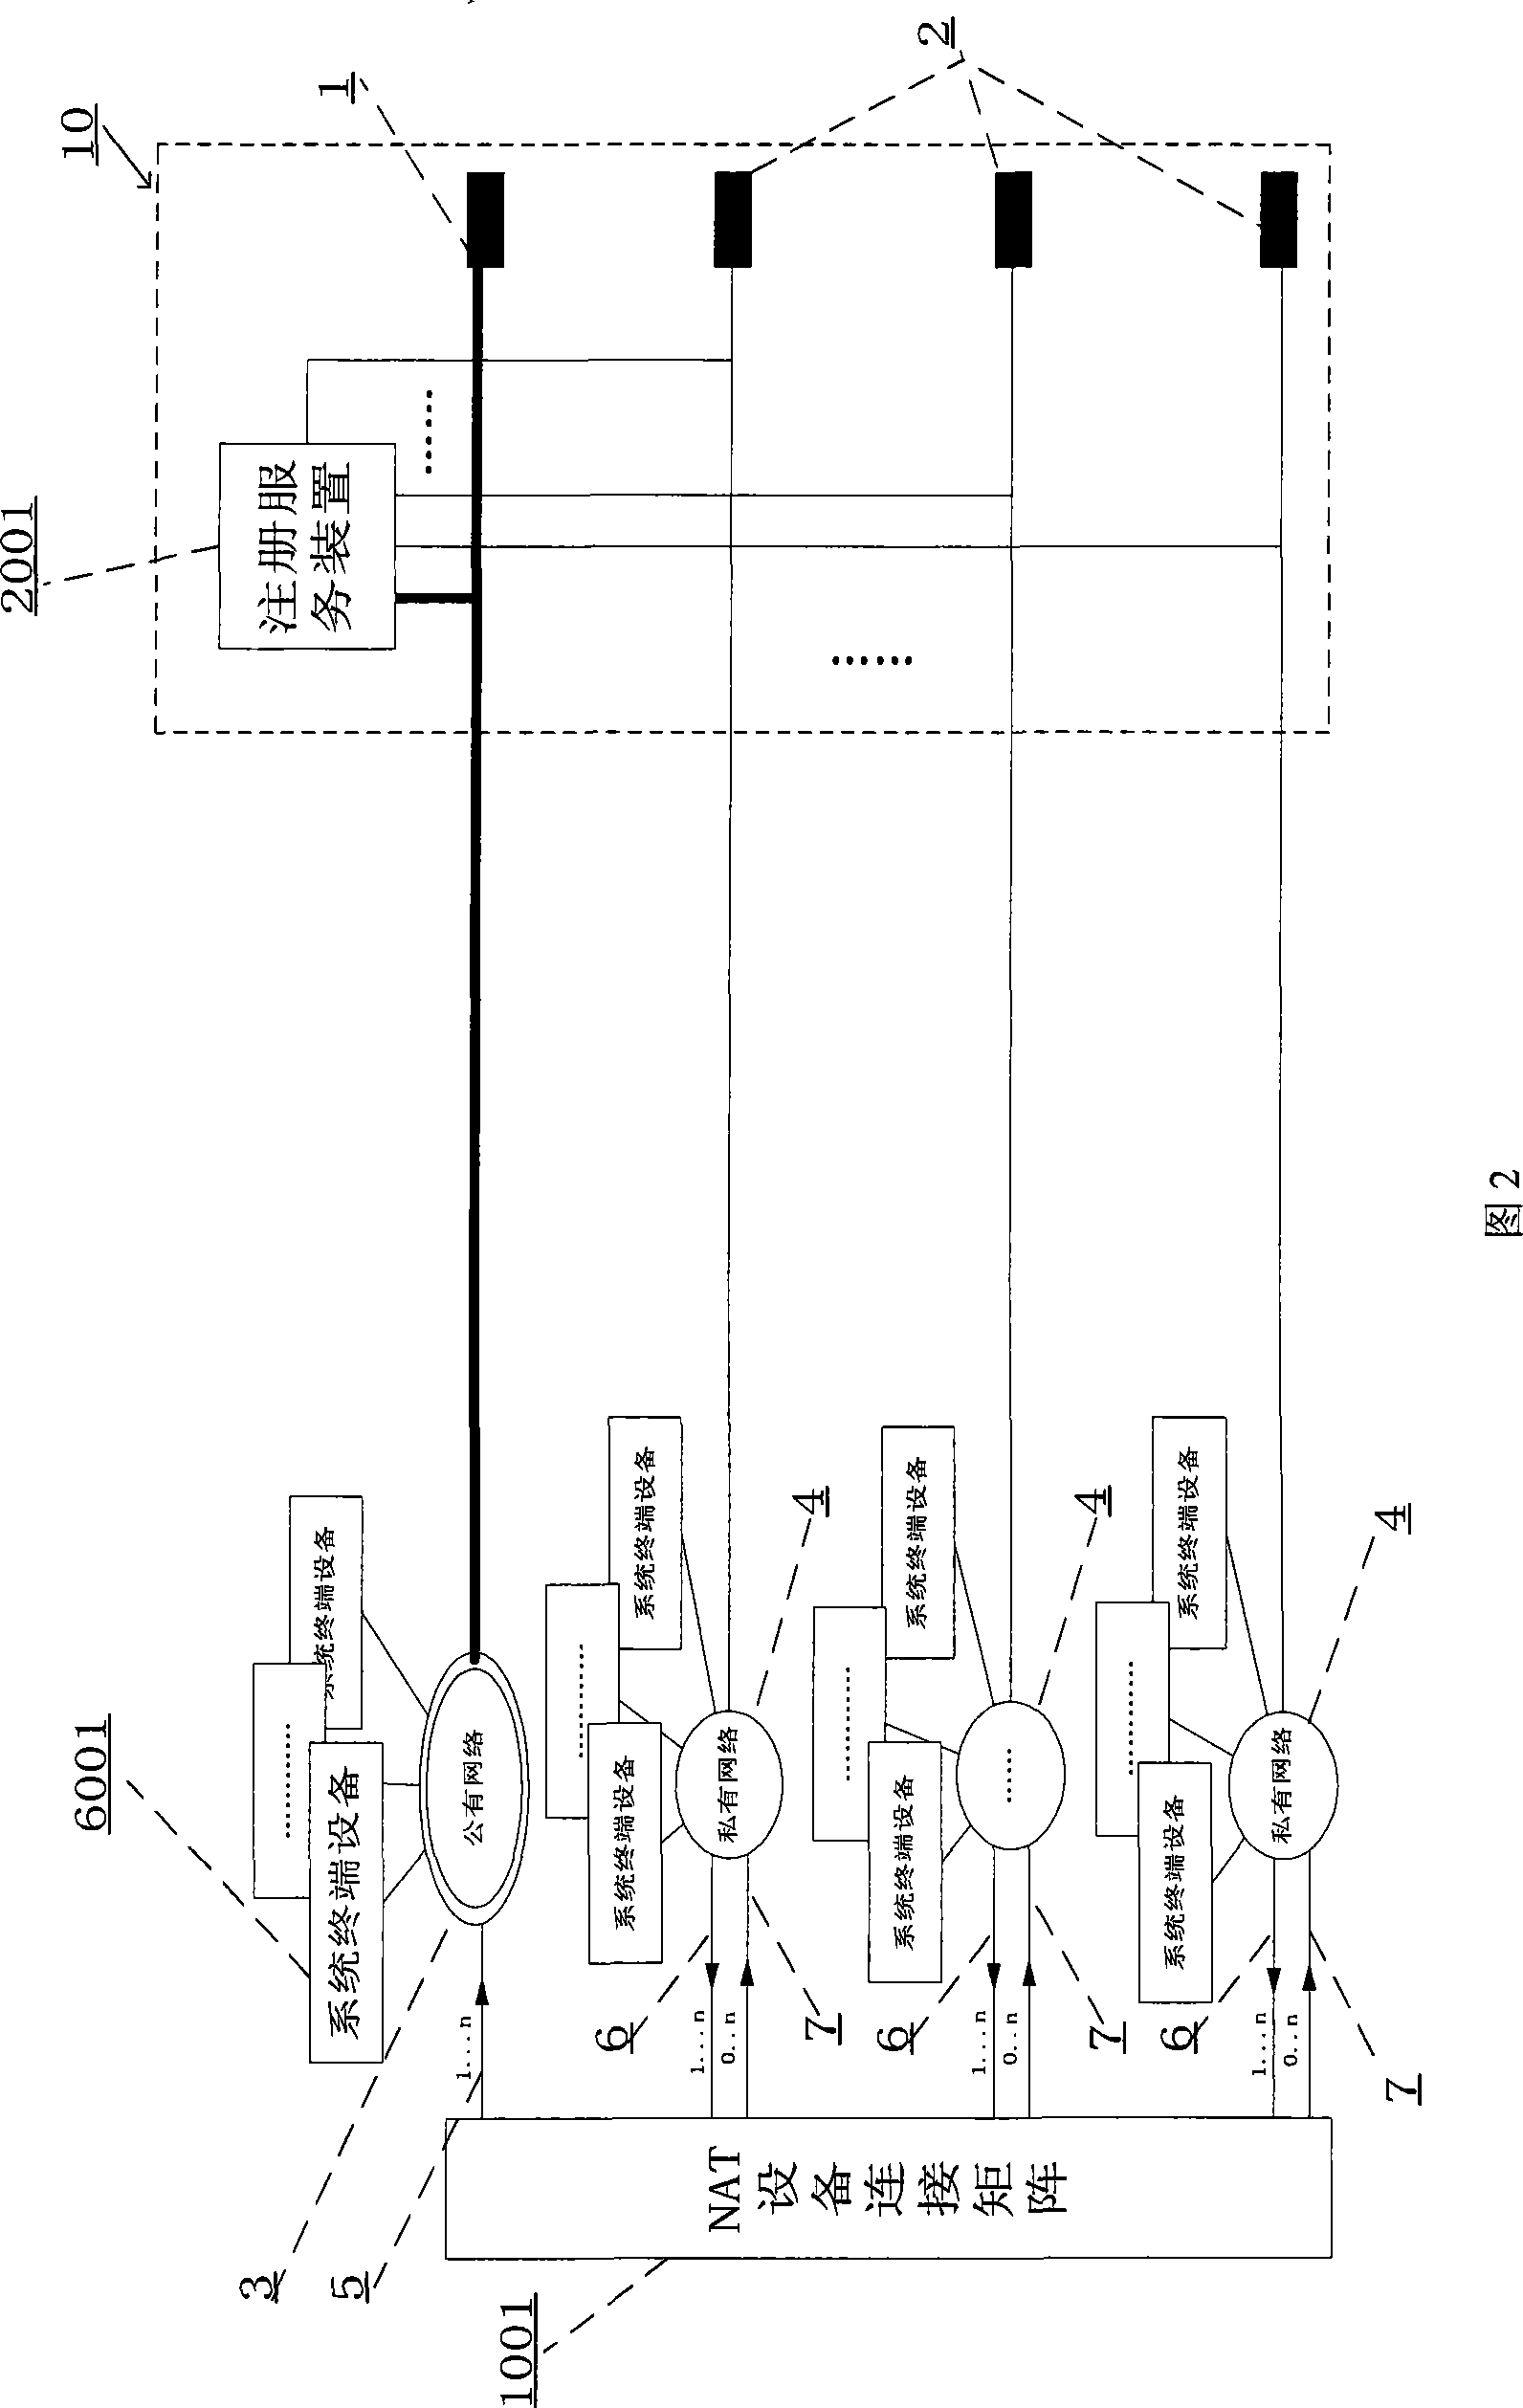 Application-oriented name registration system and its service method under multi-layer NAT environment